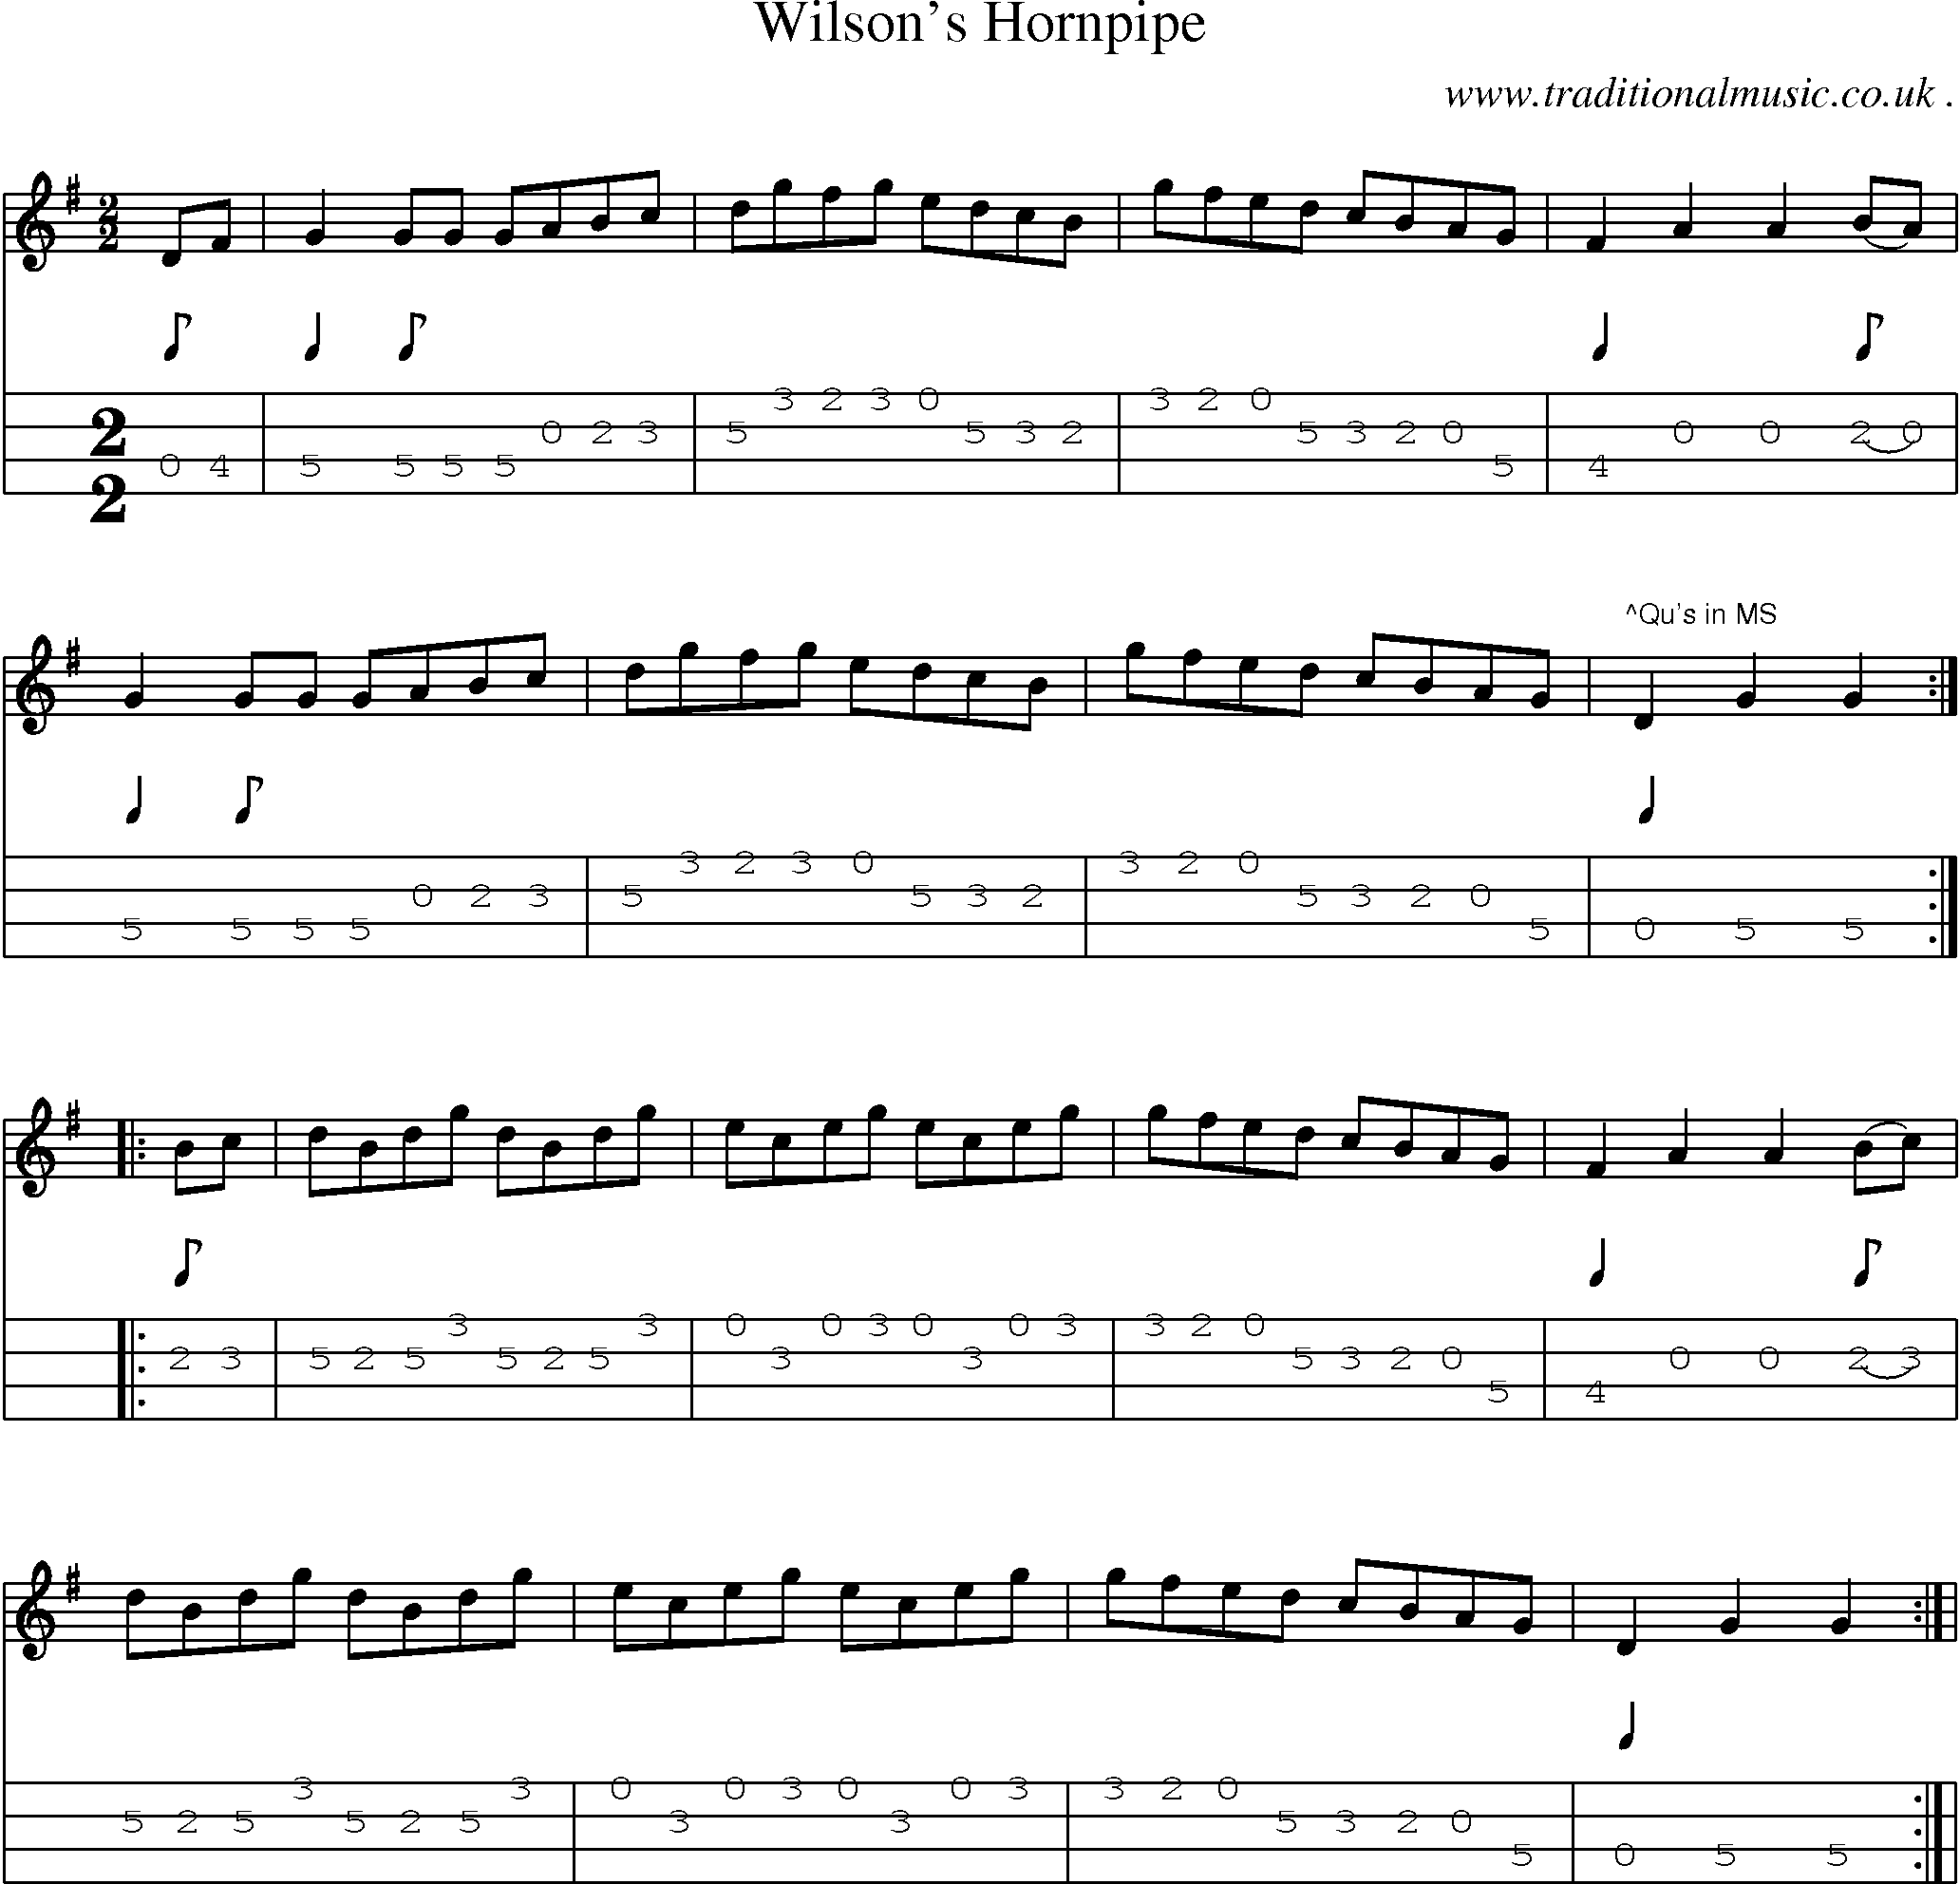 Sheet-Music and Mandolin Tabs for Wilsons Hornpipe